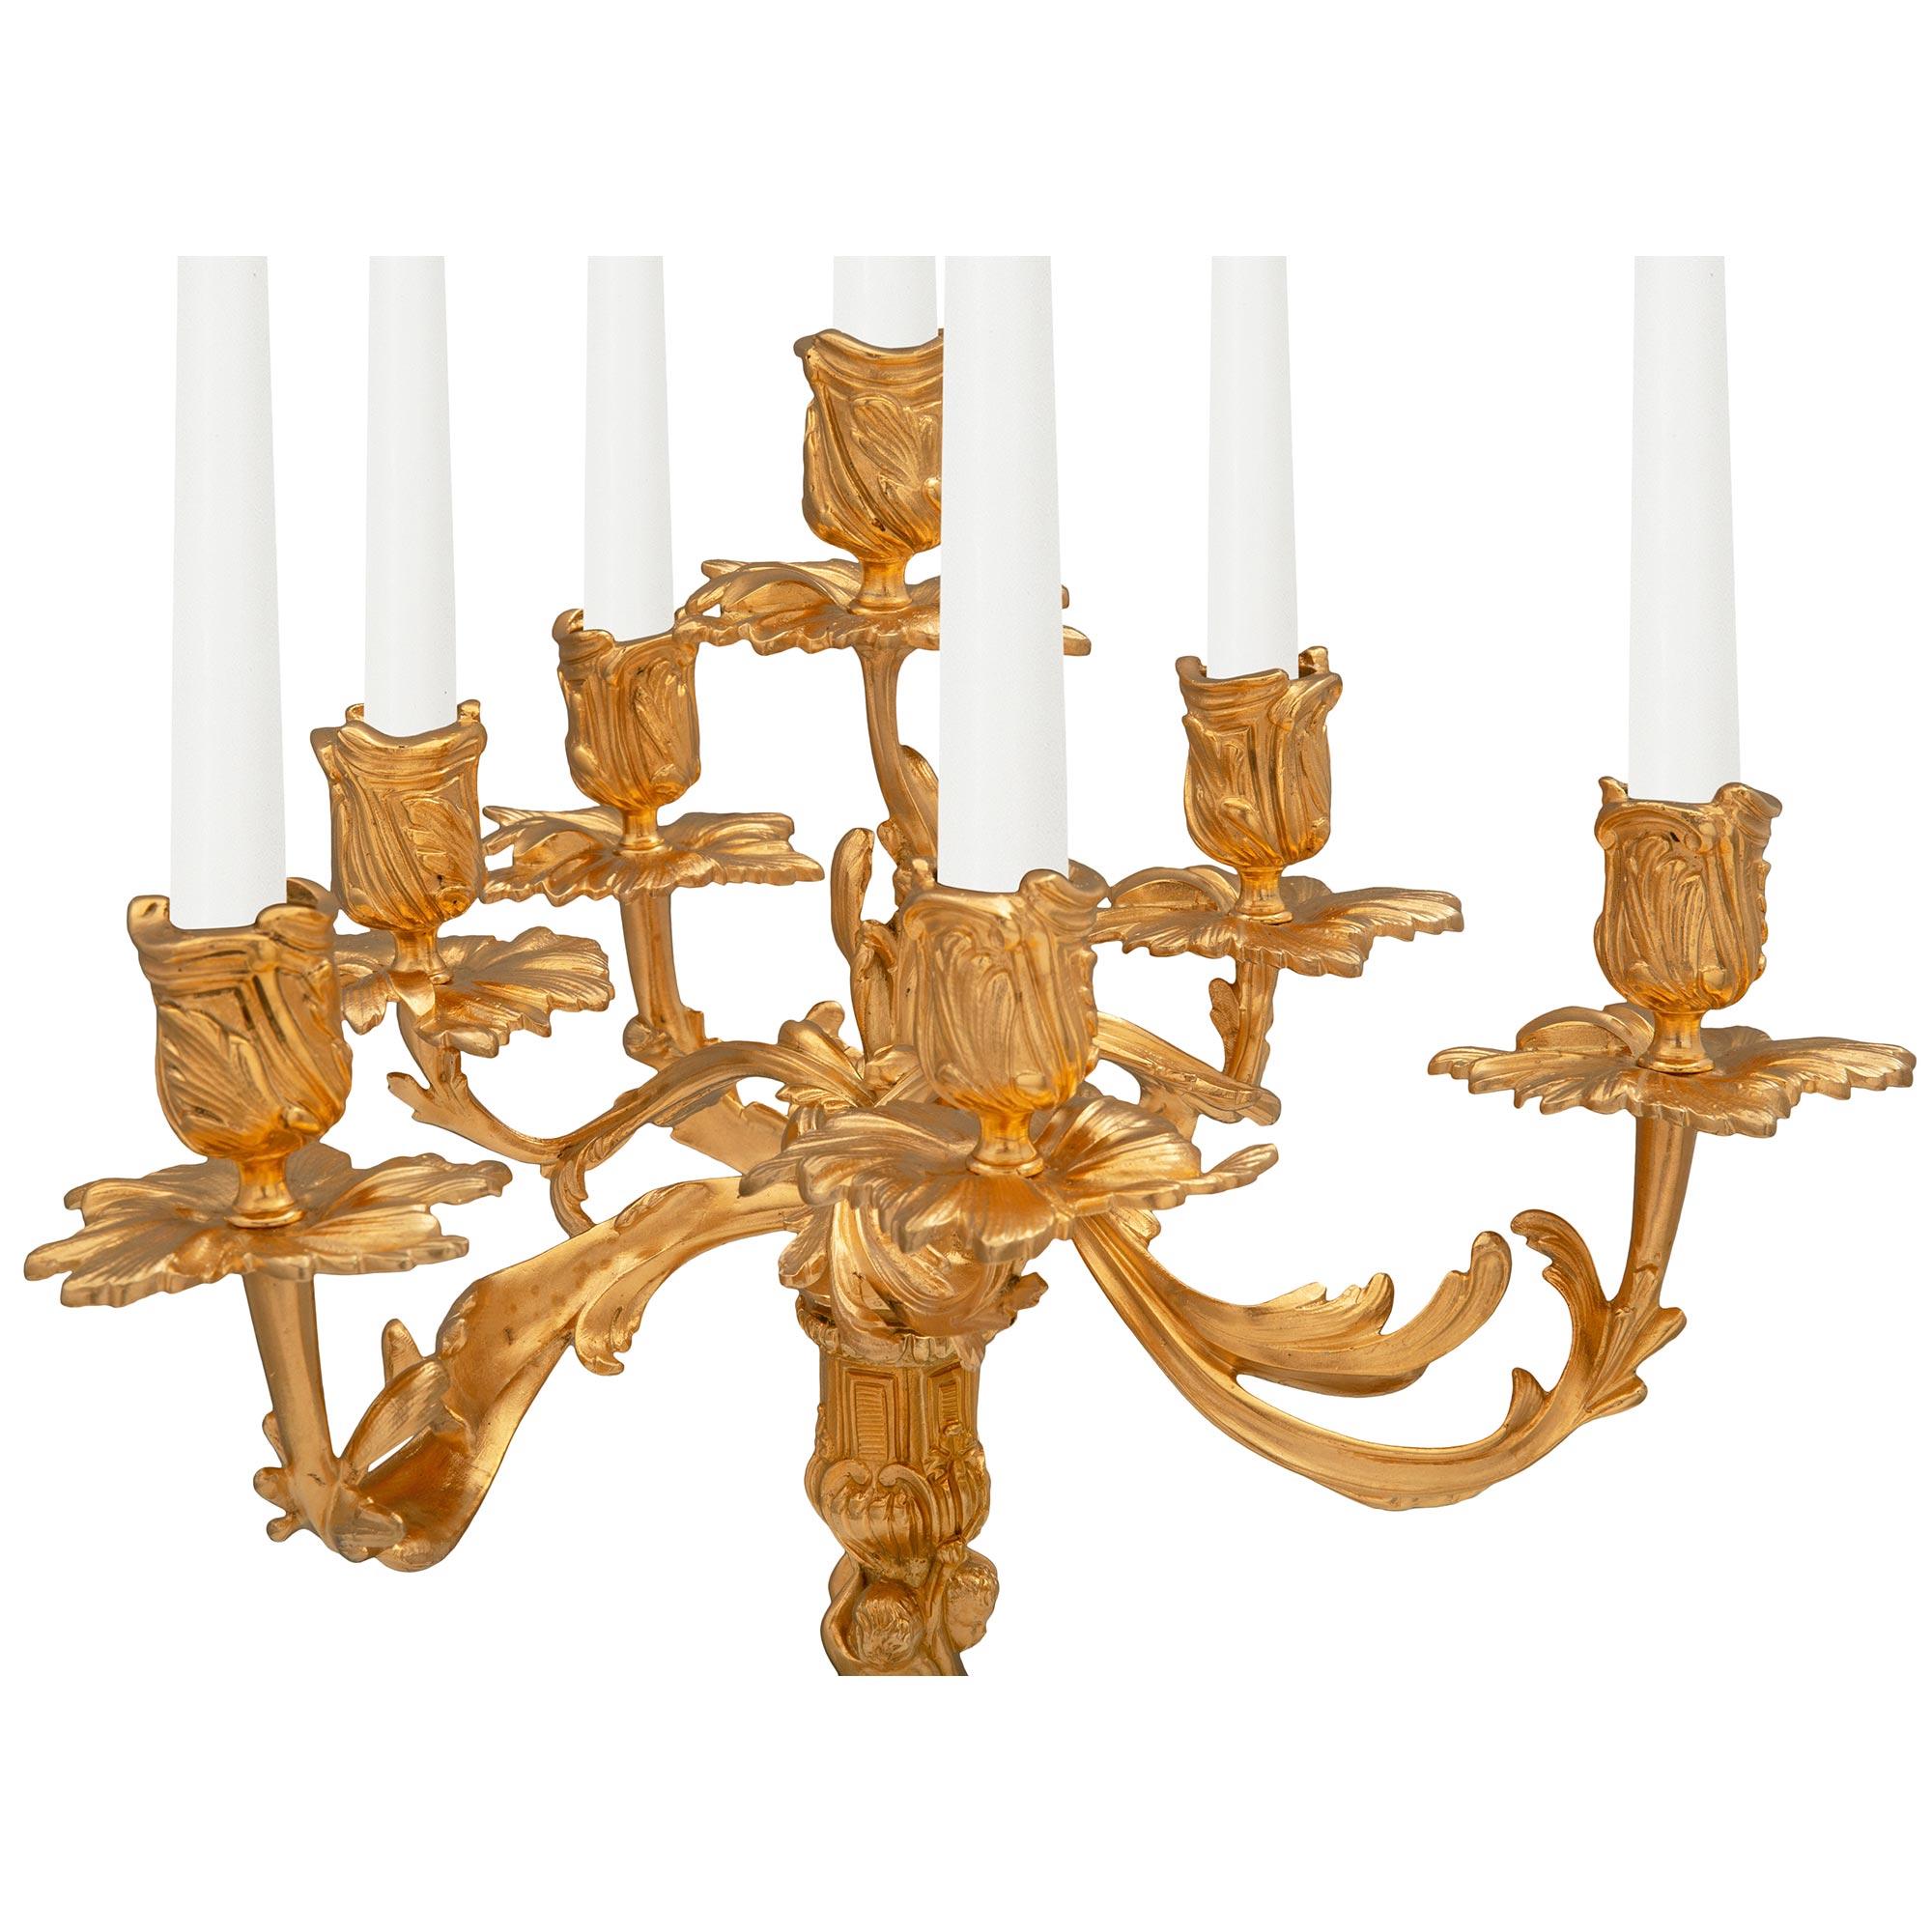 Pair of Mid-19th Century French Louis XV Style Seven Arm Candelabras In Good Condition For Sale In West Palm Beach, FL